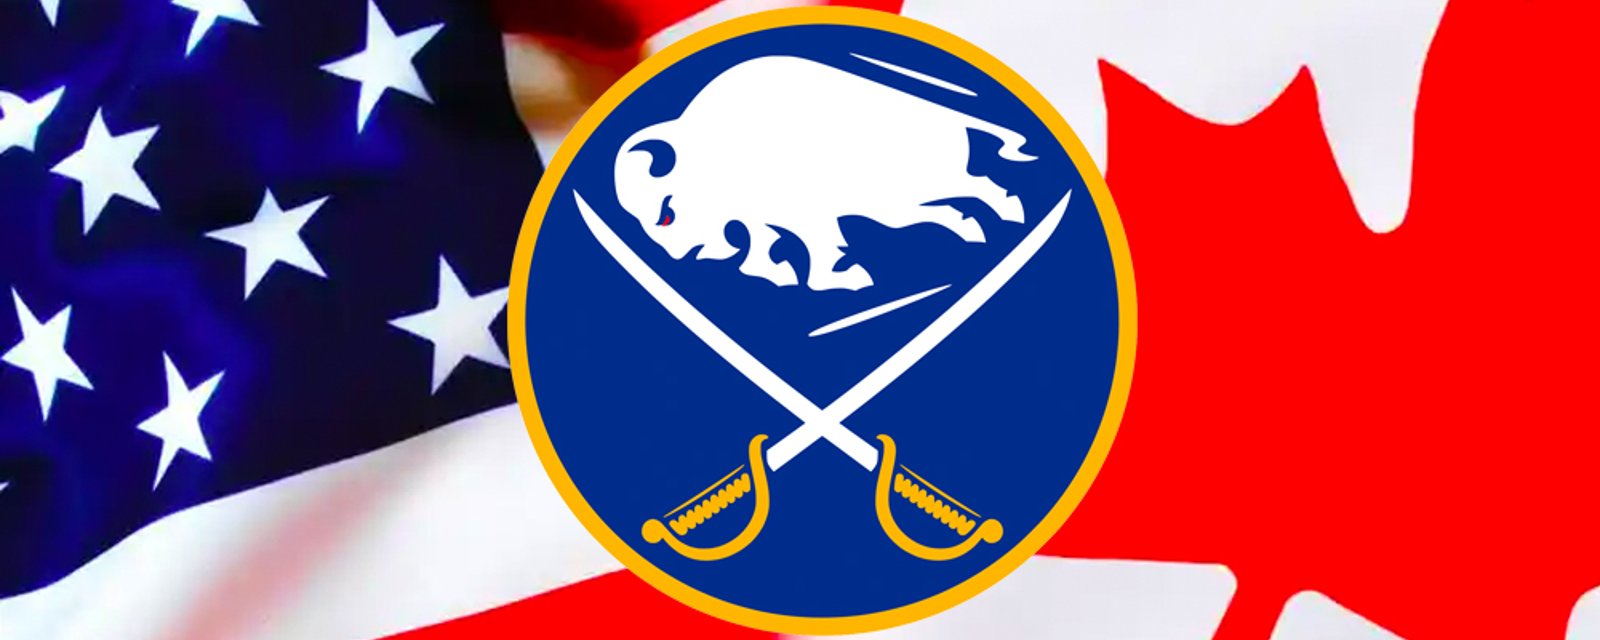 Sabres defy the “one anthem season” will play both Canadian and American national anthems